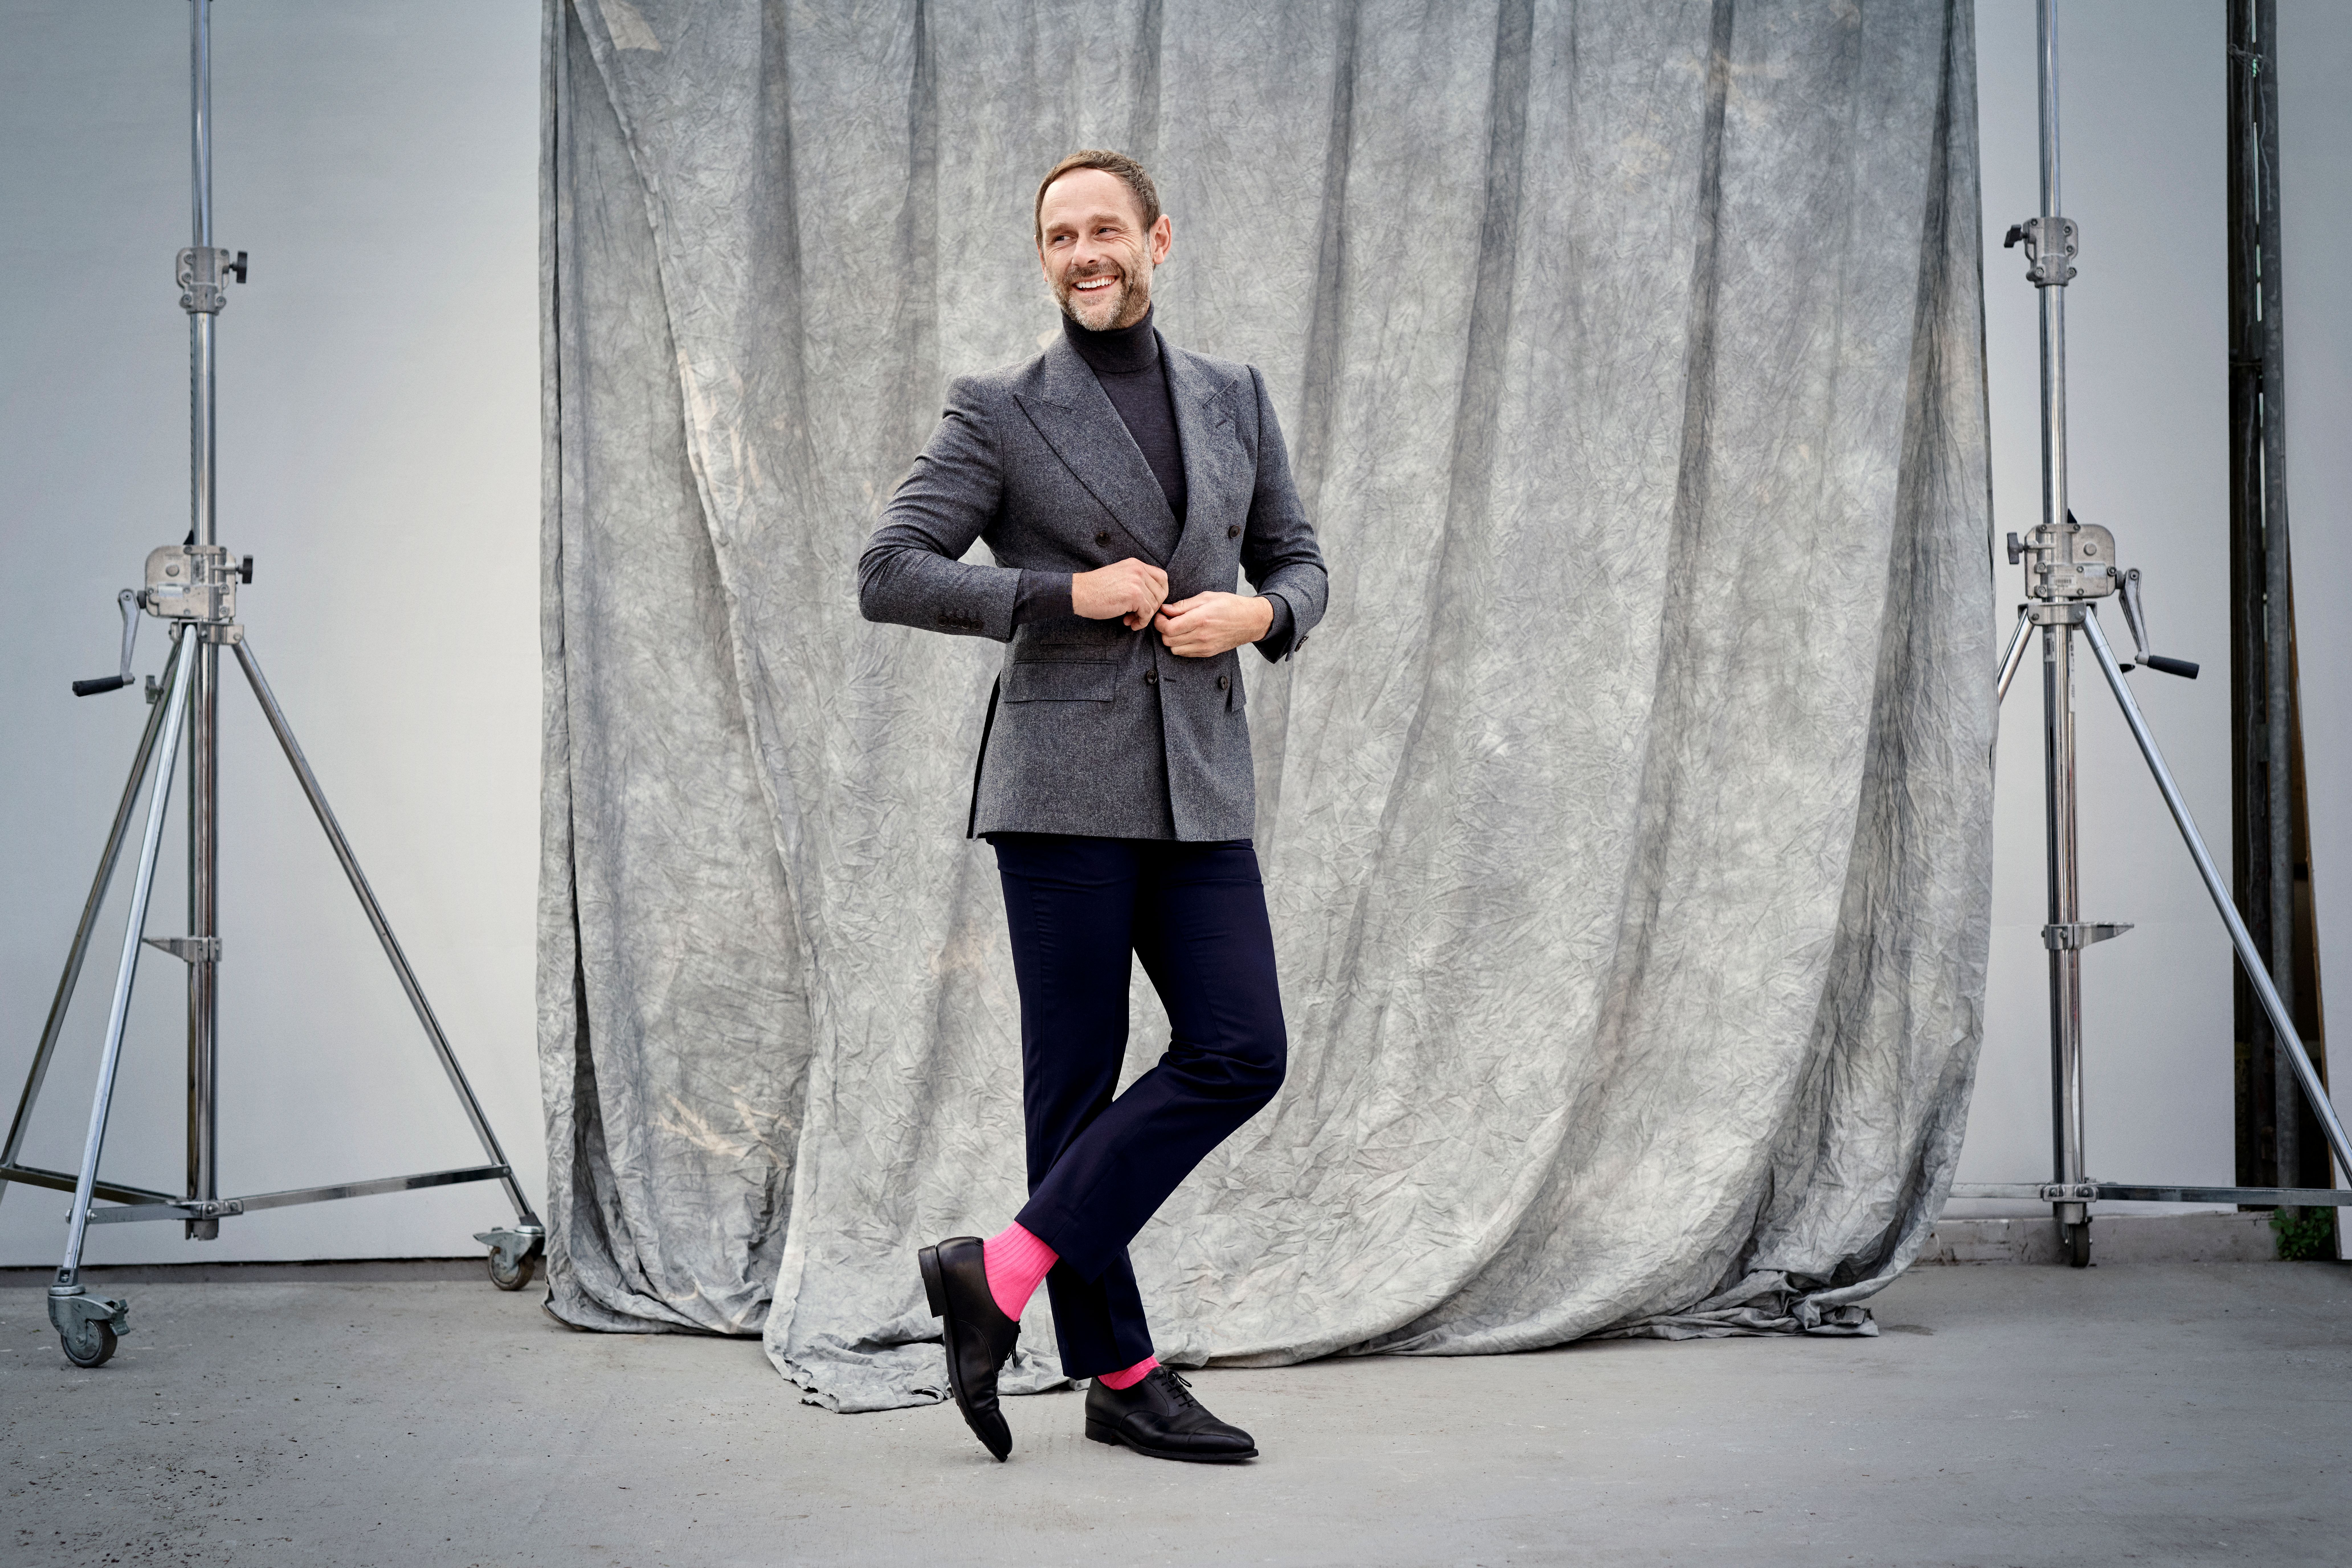 Men’s Style Tips: How to wear pink socks